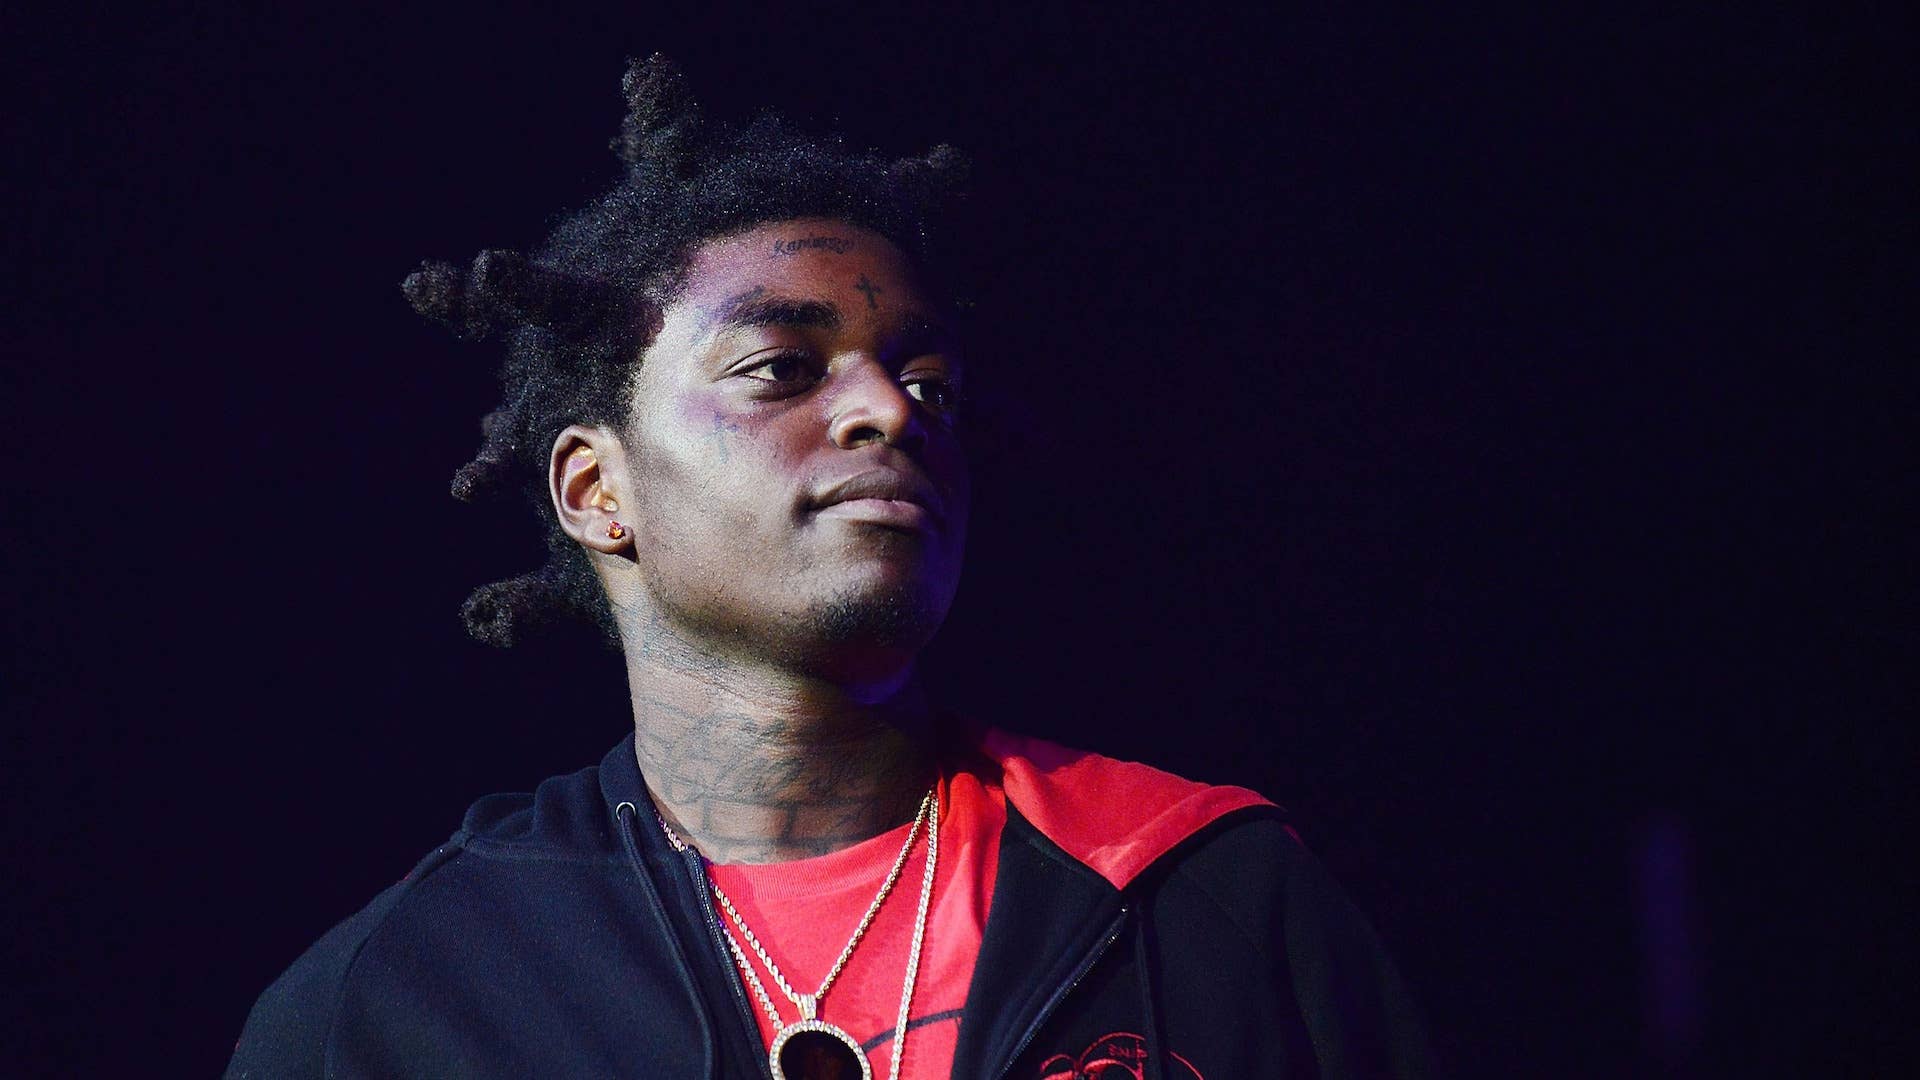 Kodak Black performs during the Nick Cannon's Wild N Out Tour